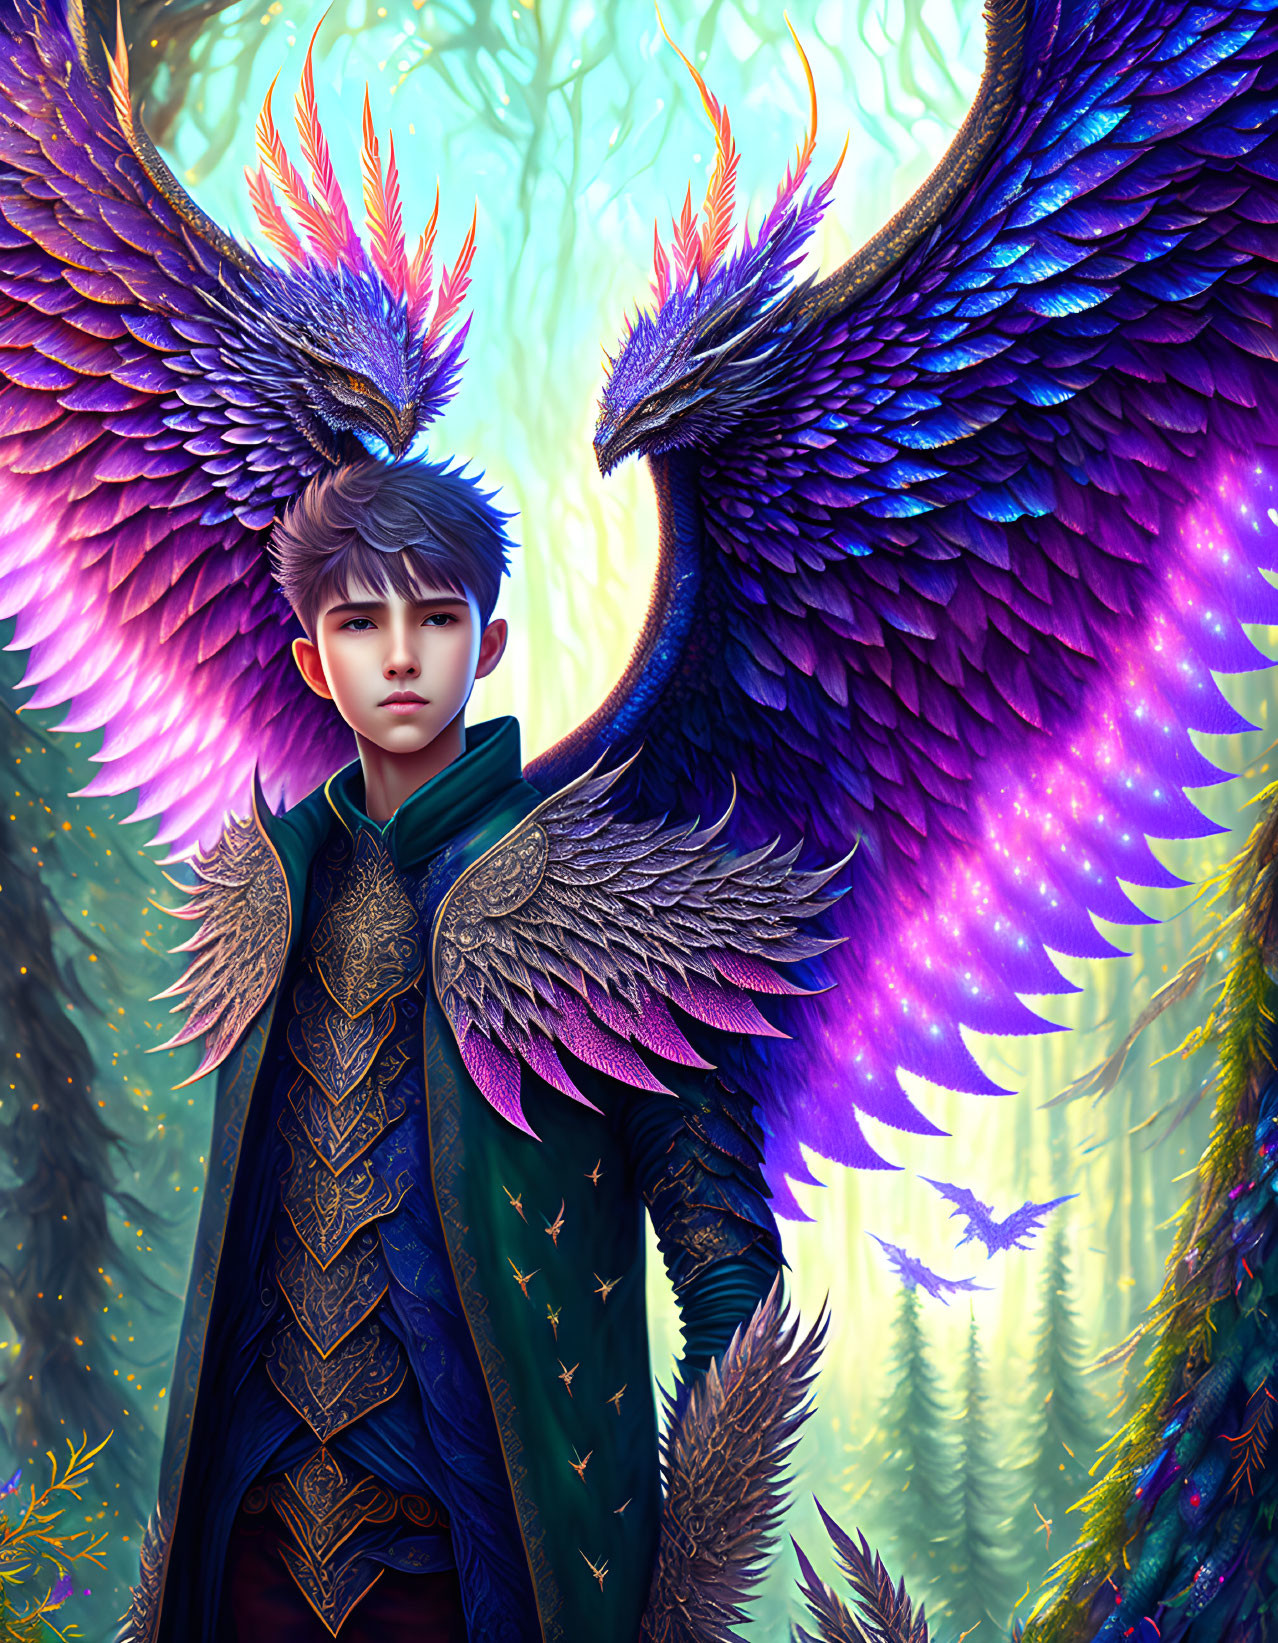 Vibrant purple-winged figure in enchanted forest with ethereal lights